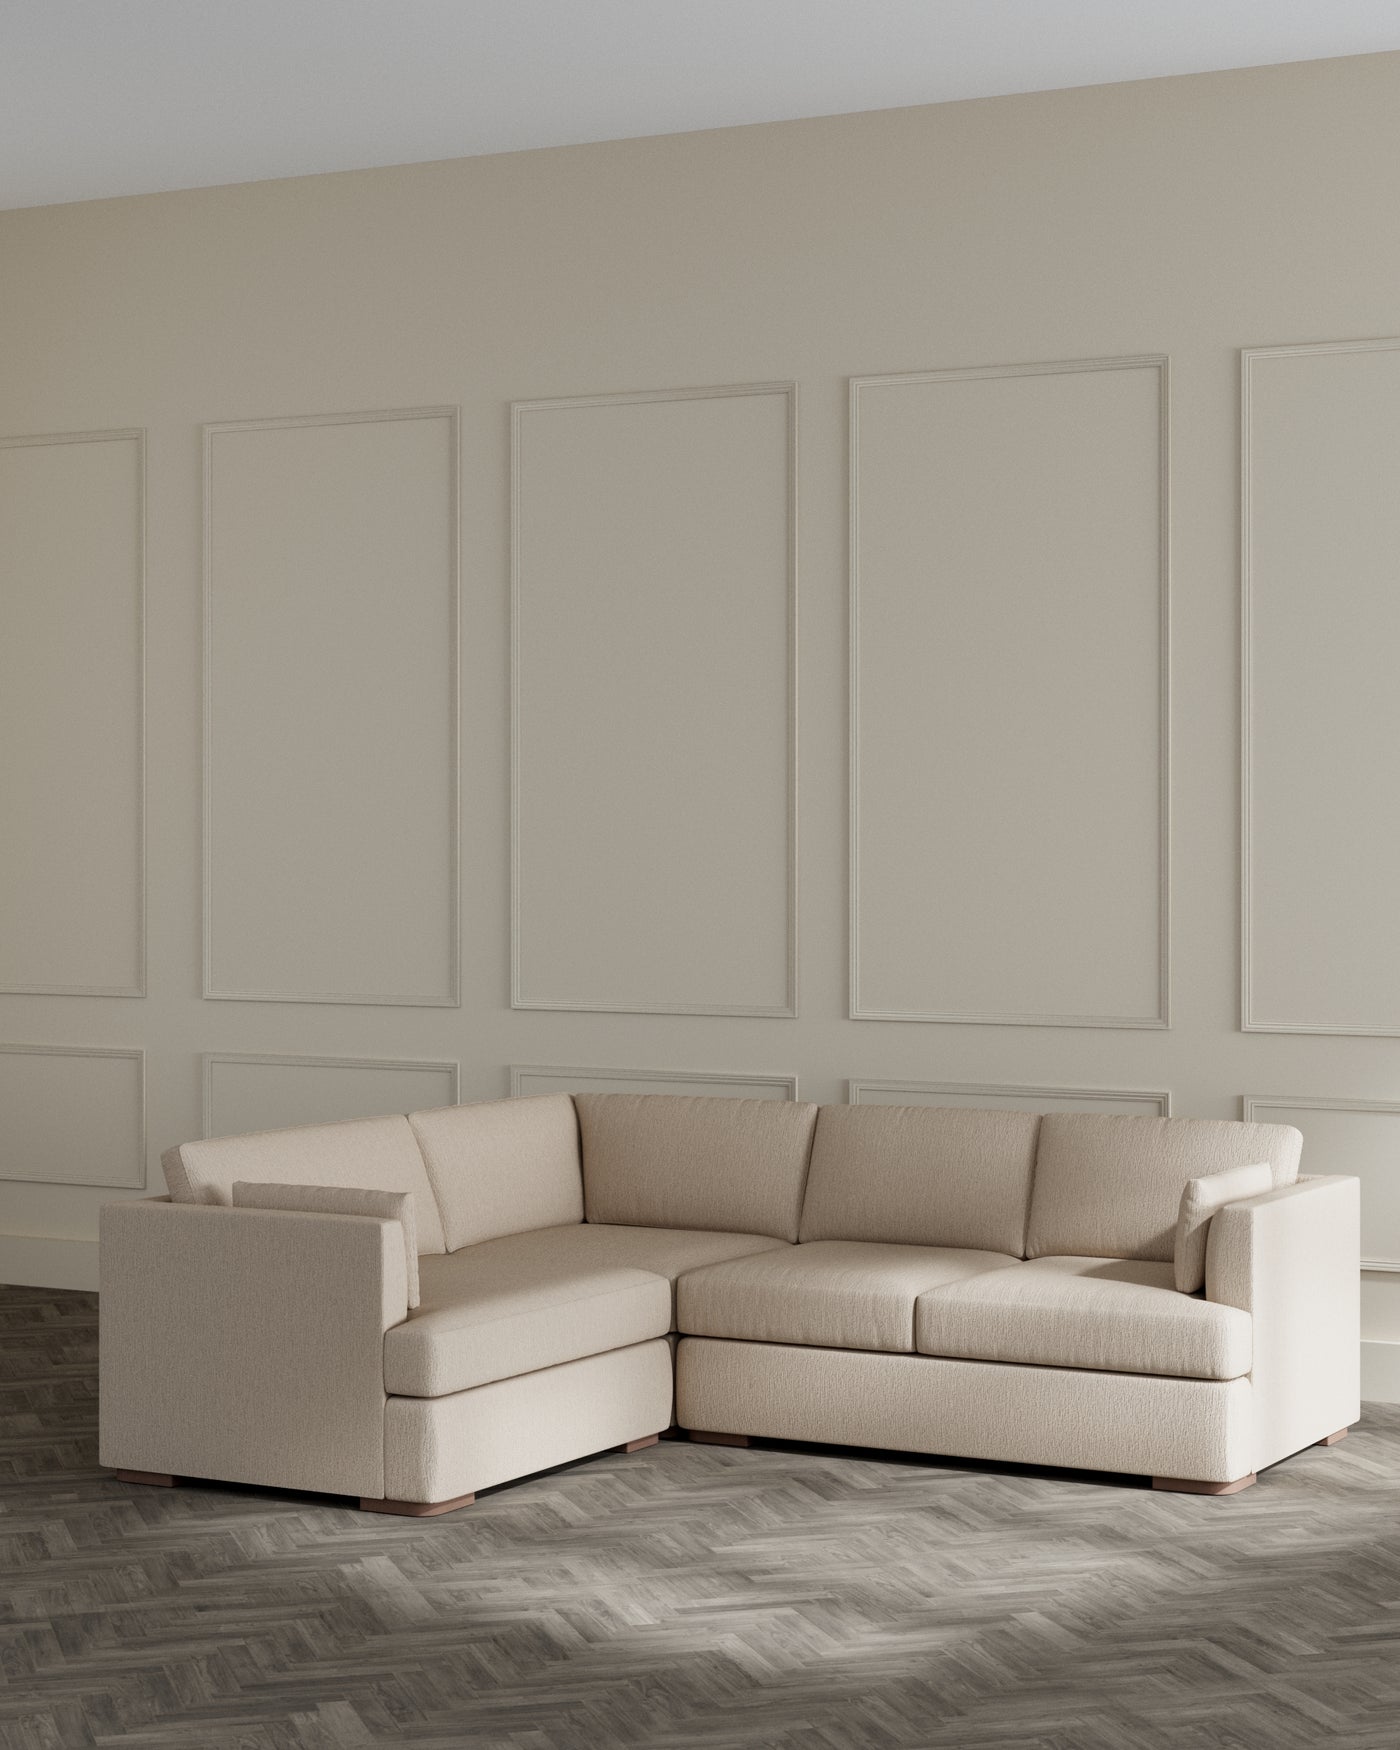 Modern beige L-shaped sectional sofa with clean lines and plush cushions, positioned on a herringbone-pattern hardwood floor against a panelled wall.